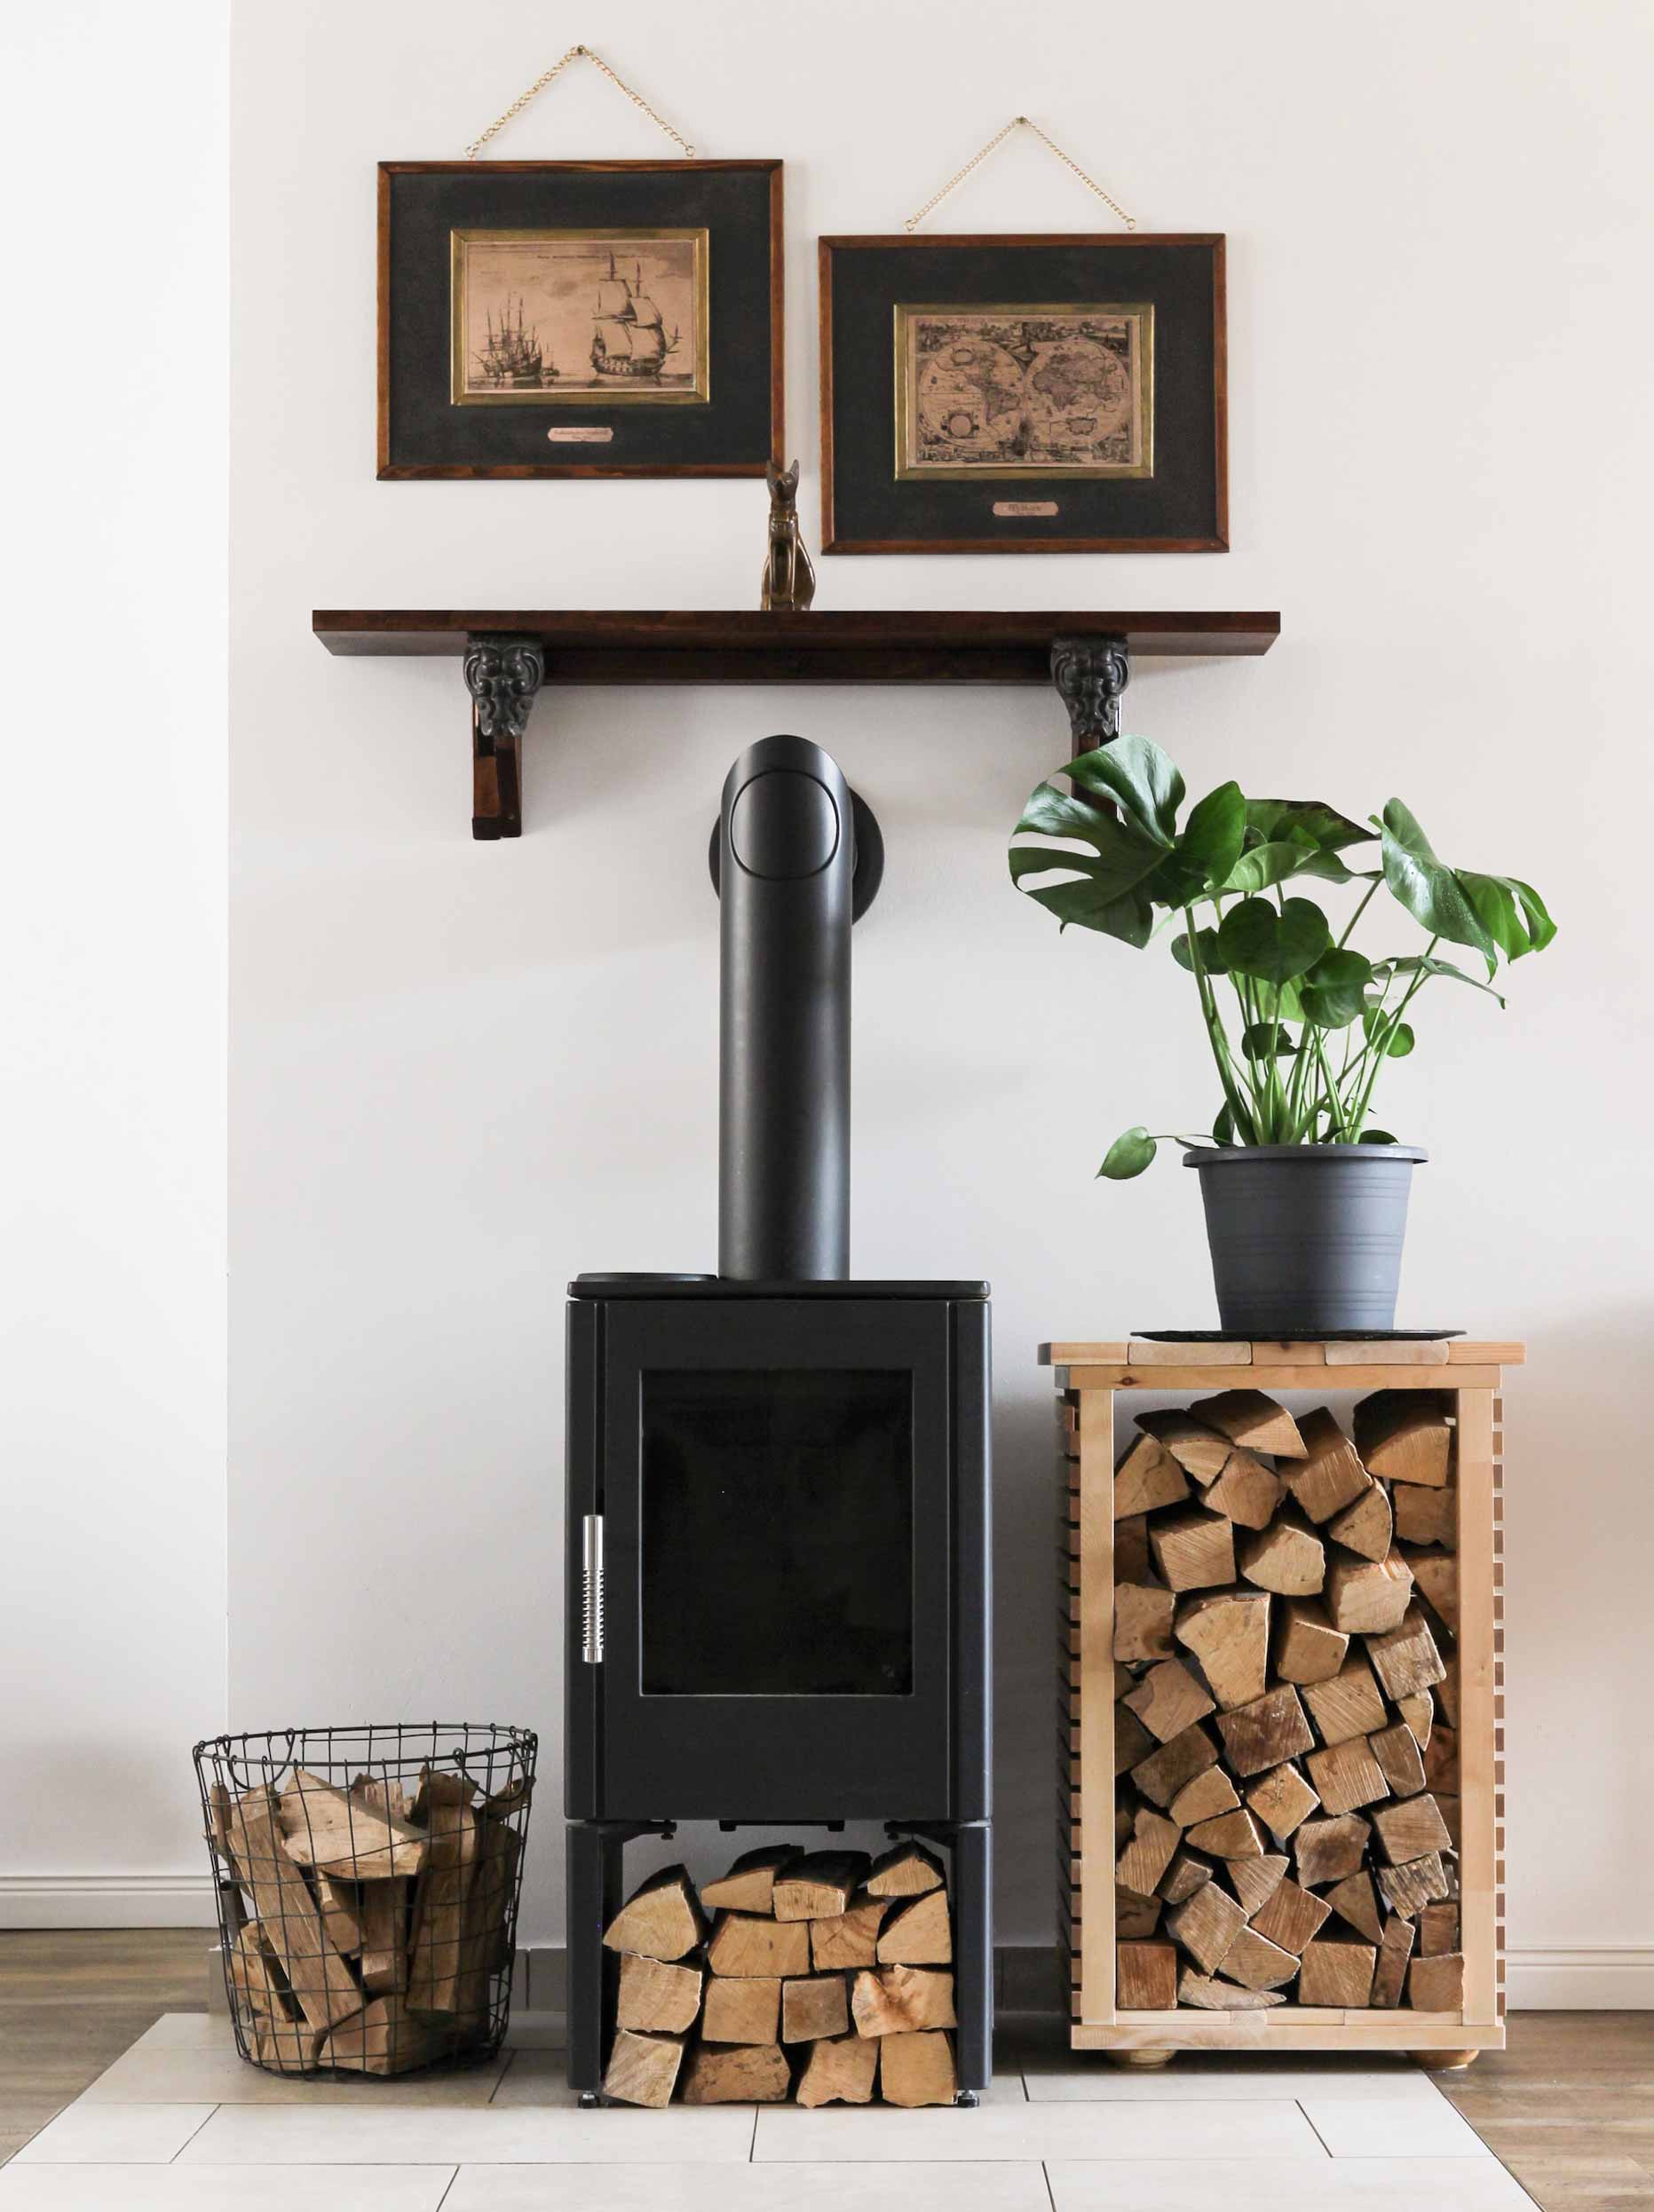 Wood-burning stove, wood neatly placed near it, and a plant